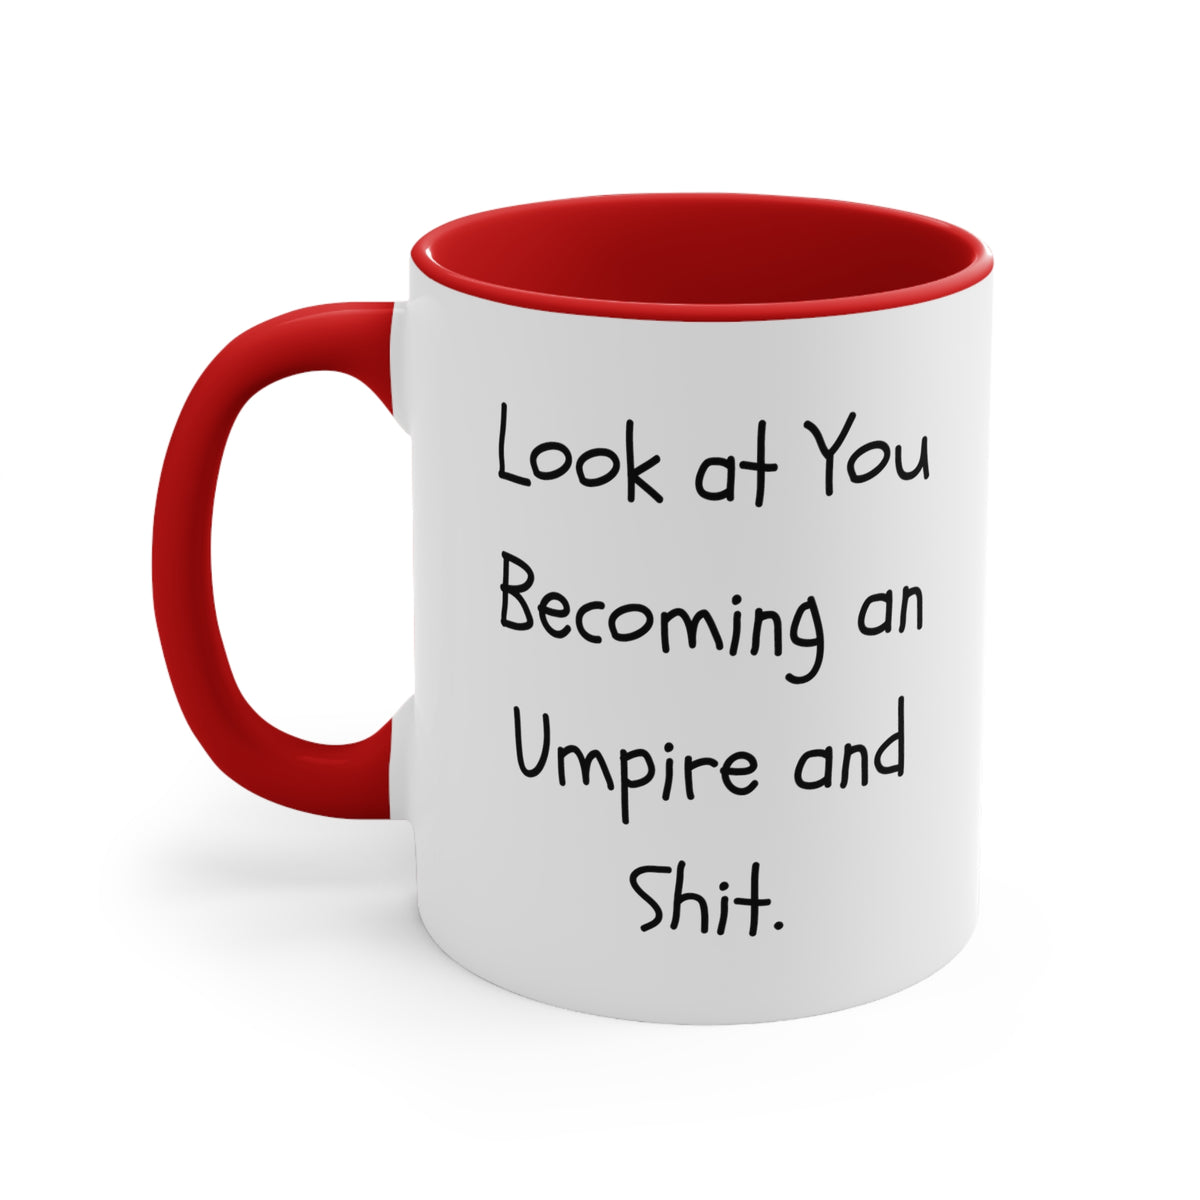 Beautiful Umpire Gifts, Look at You Becoming, Epic Birthday Two Tone 11oz Mug Gifts Idea For Men Women, Umpire Gifts From Boss, Inexpensive umpire gifts, Budget umpire gifts, Discount umpire gifts,